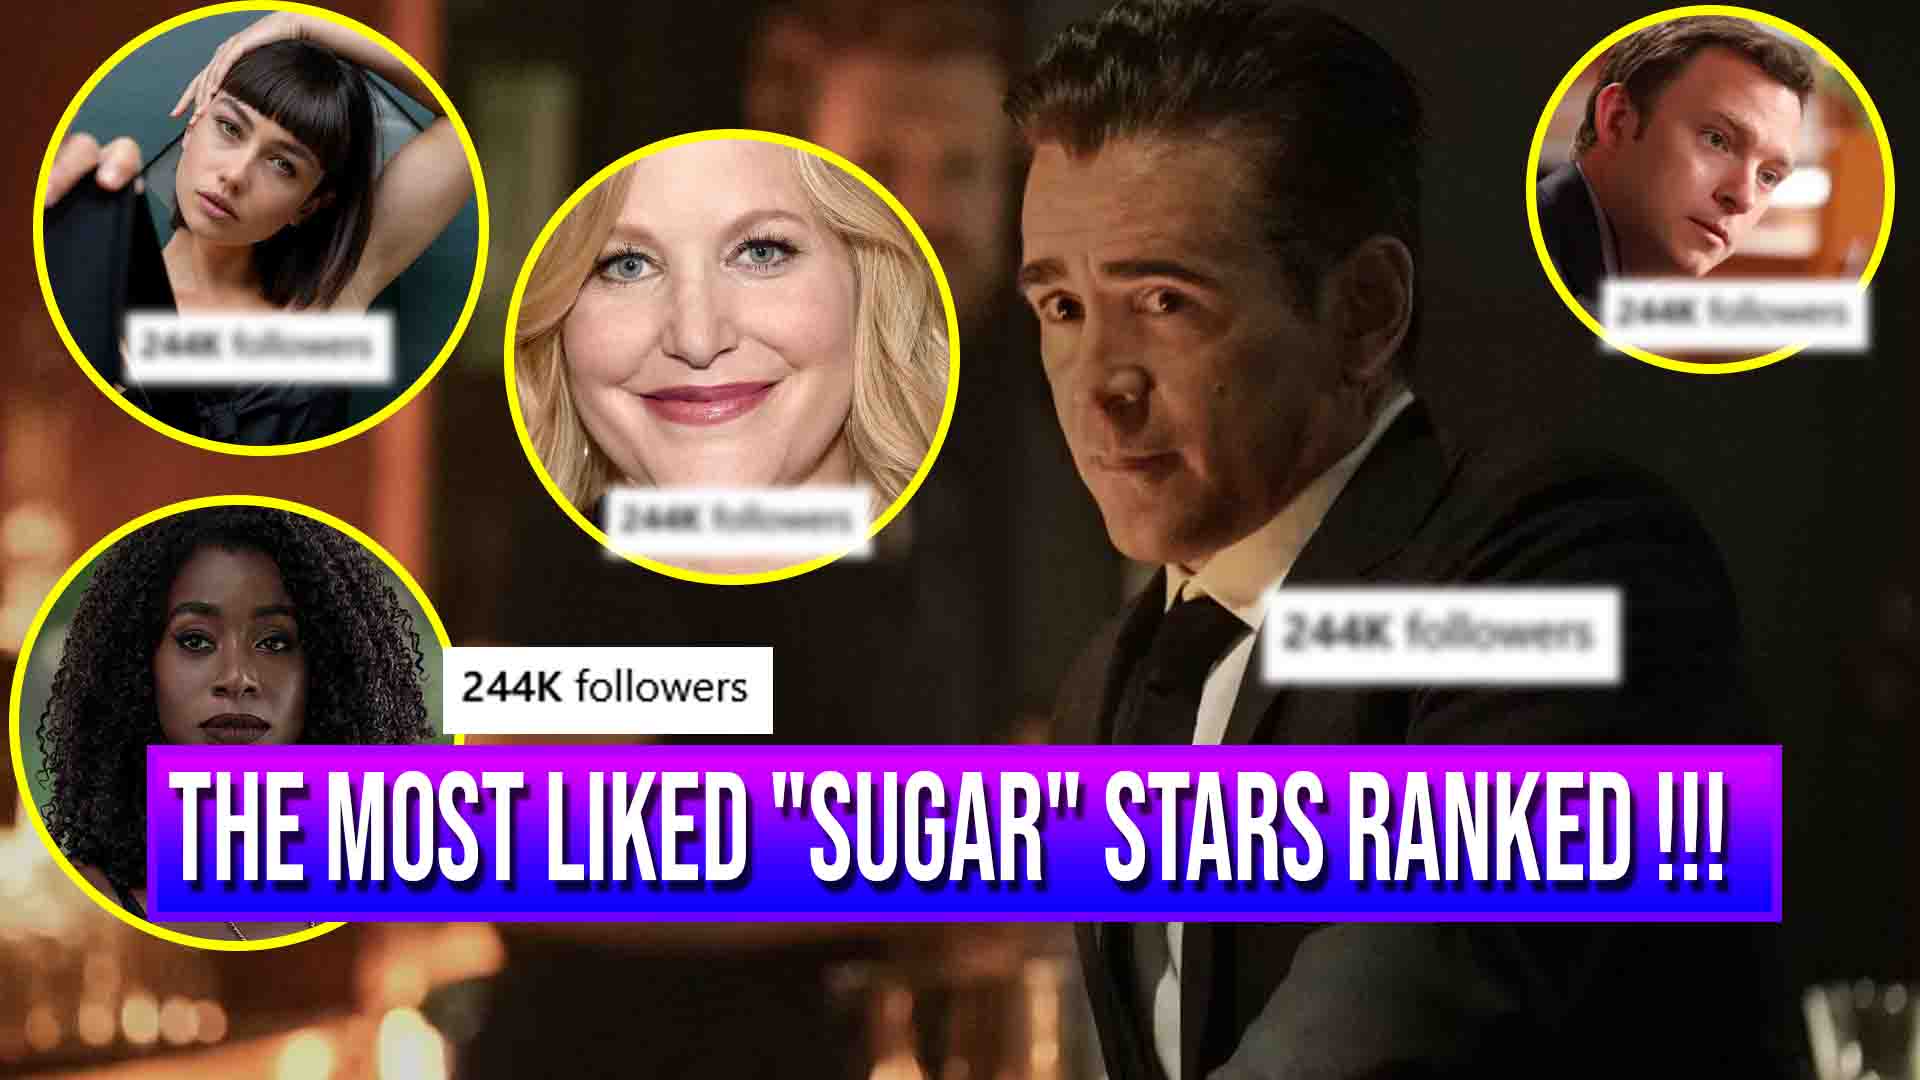 The Most Liked “Sugar” Stars Ranked From Lowest To Highest